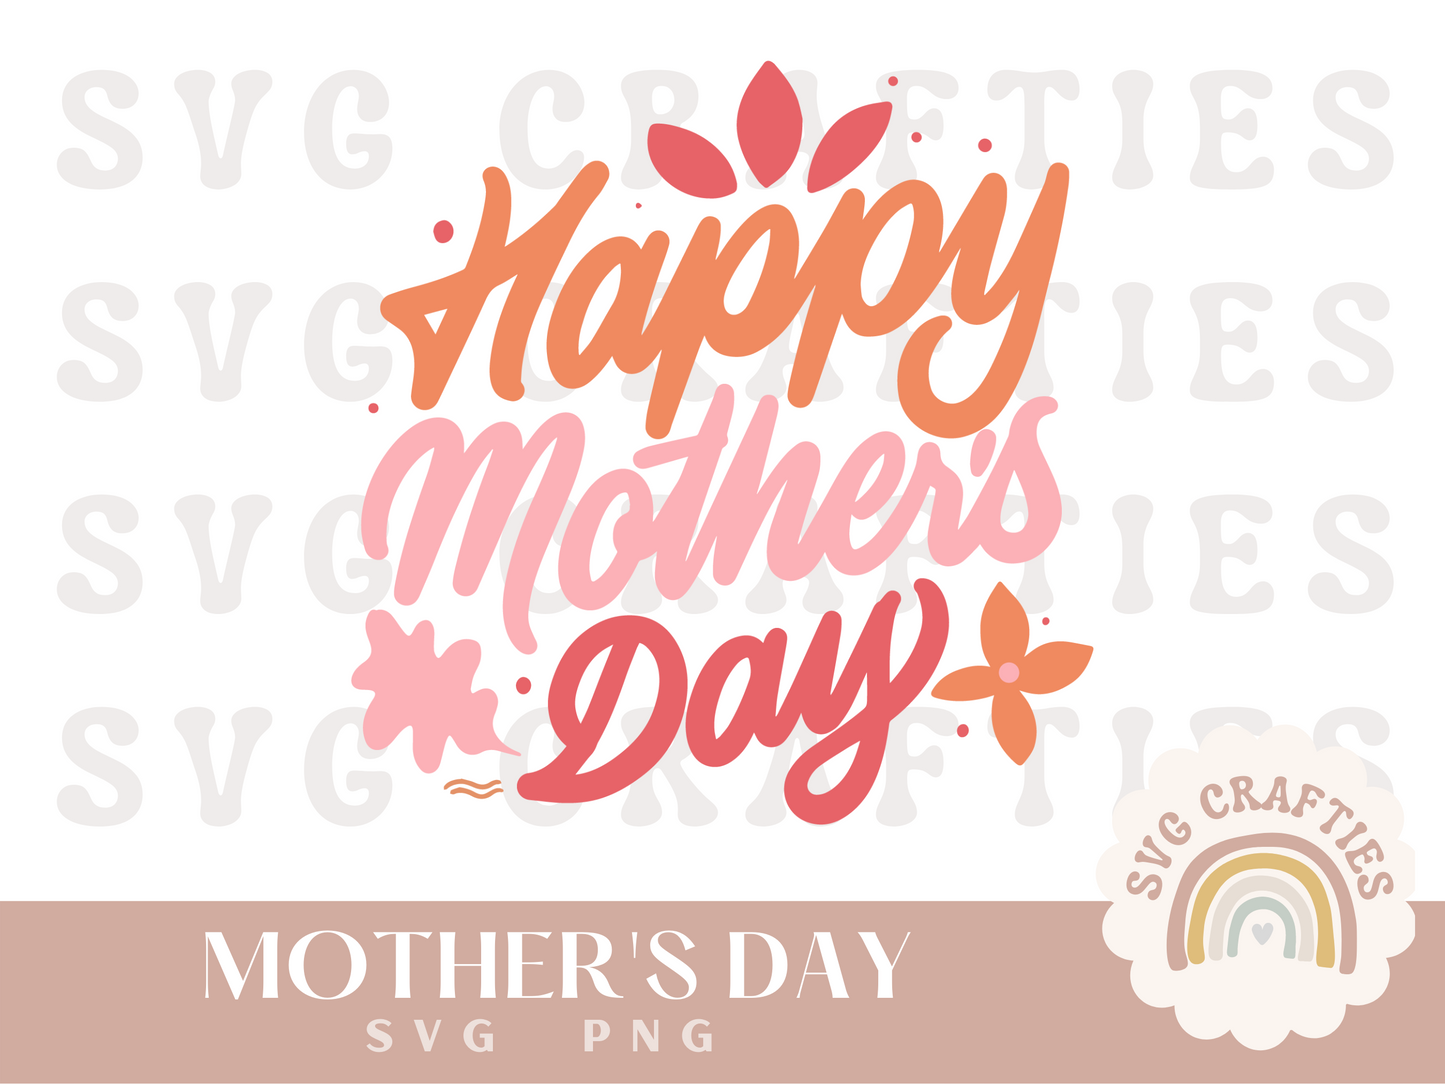 Happy Mother's Day Free SVG Download